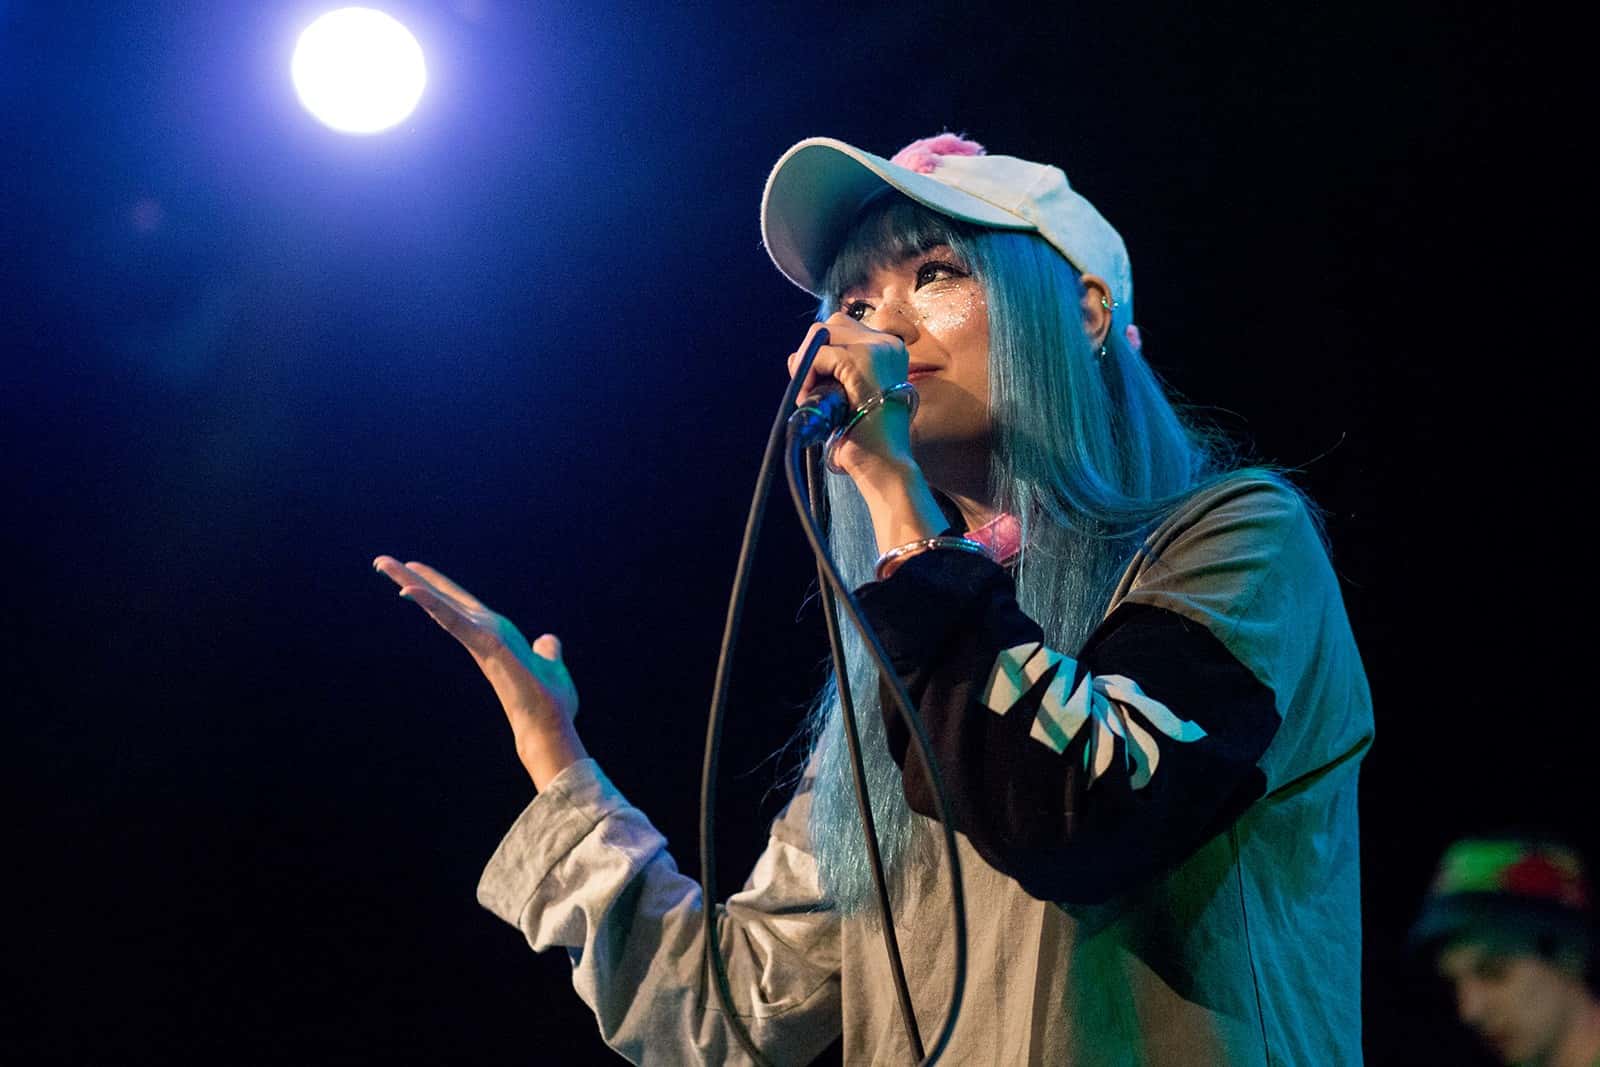 Kero Kero Bonito Provided Yet Another Incredible Show in Seattle KXSU